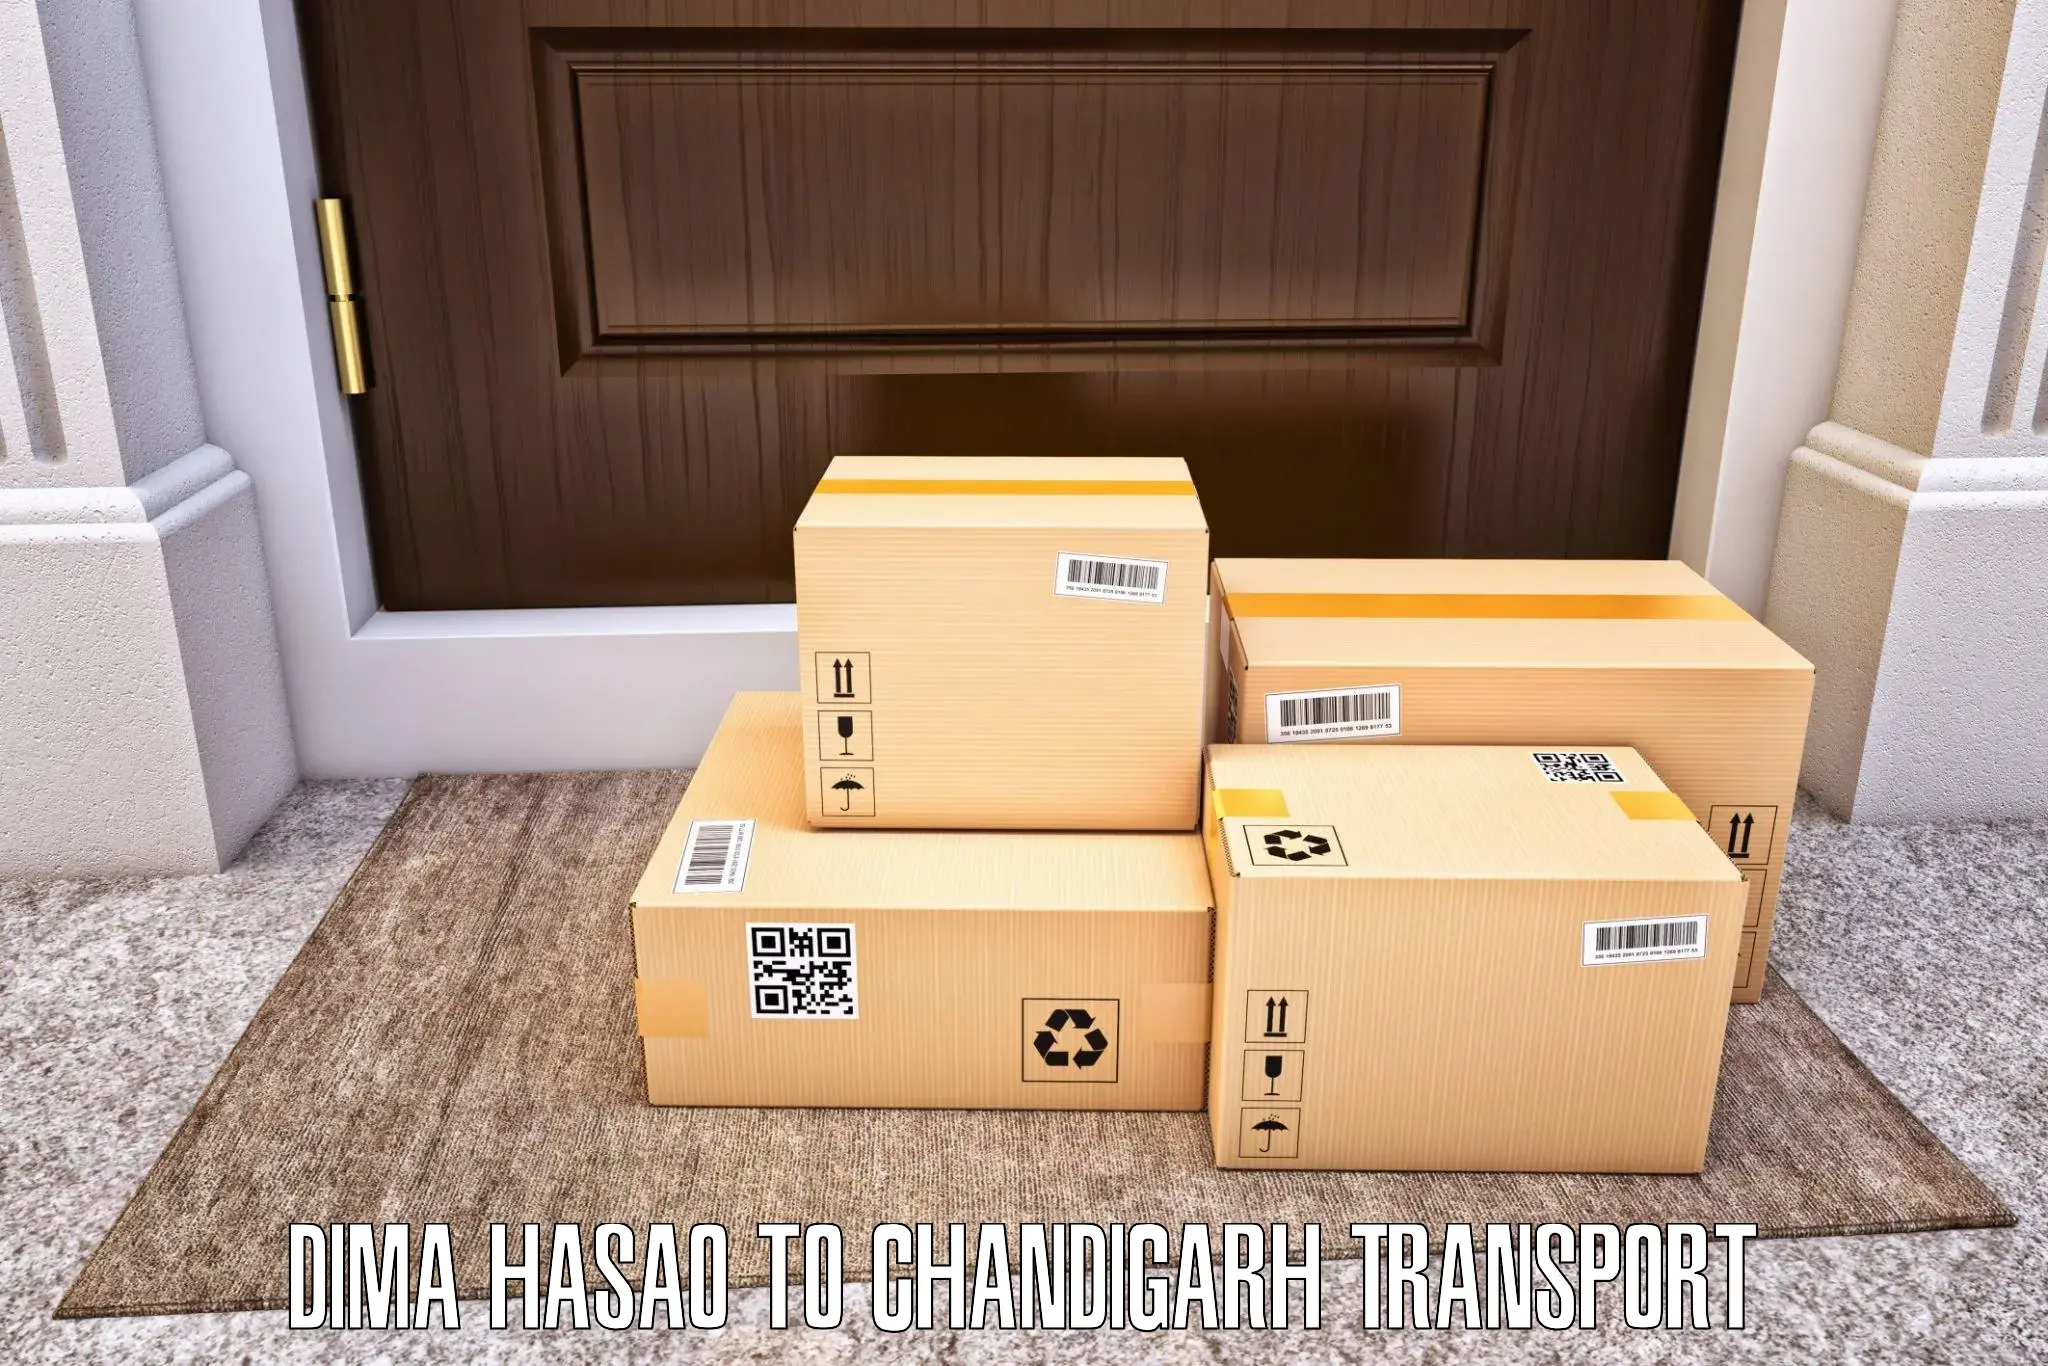 Transport shared services Dima Hasao to Chandigarh